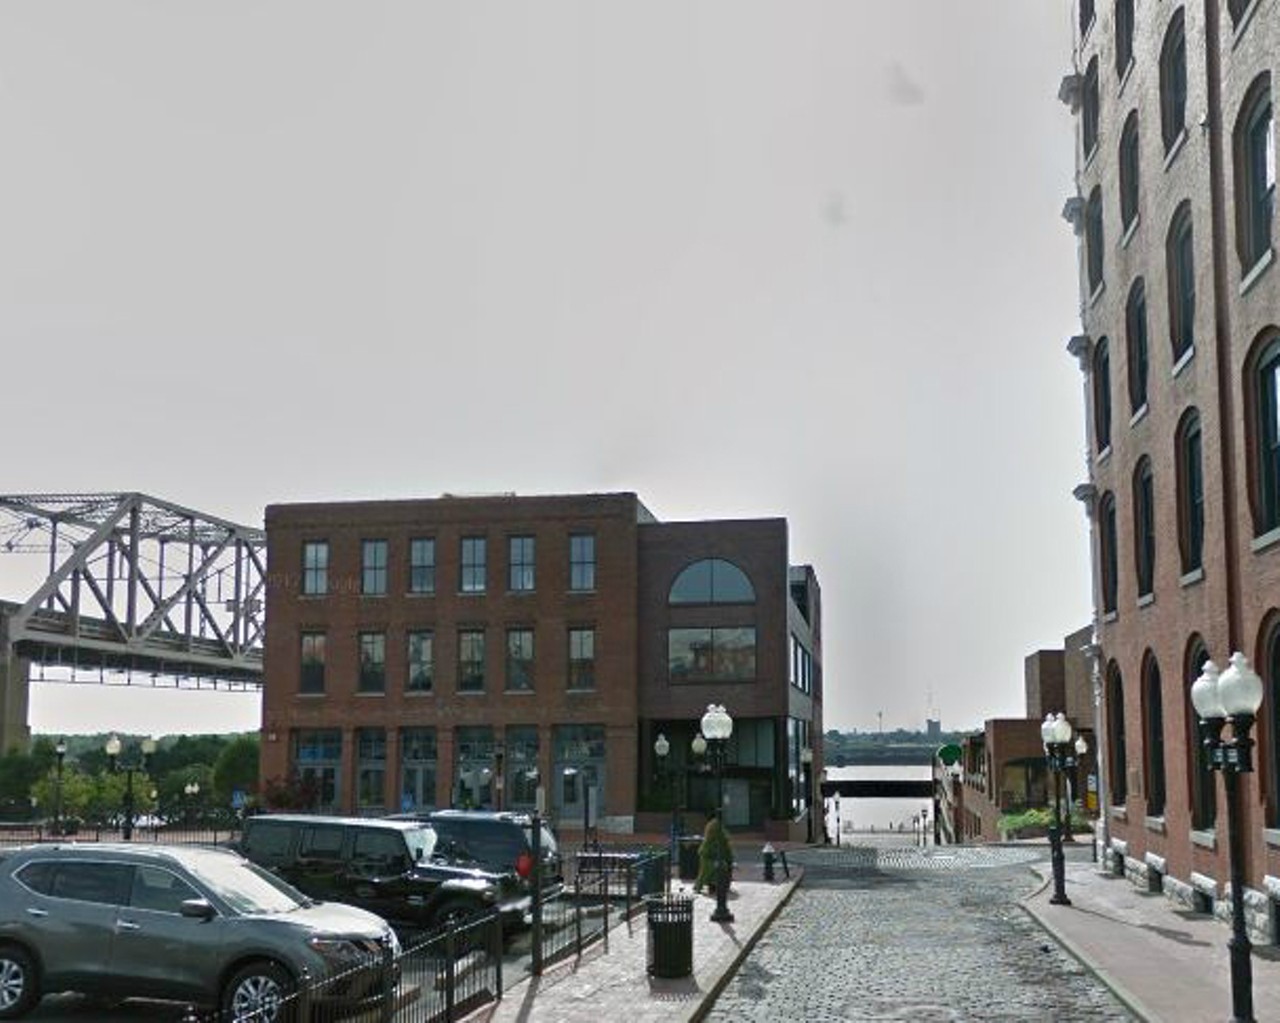 "Stagger Lee got murdered here."
Morgan Street by the riverfront
"Remember that song about Stagger Lee? Well, any song about Stagger Lee? This is Morgan Street, where it all went down."
Photo courtesy of Google Maps